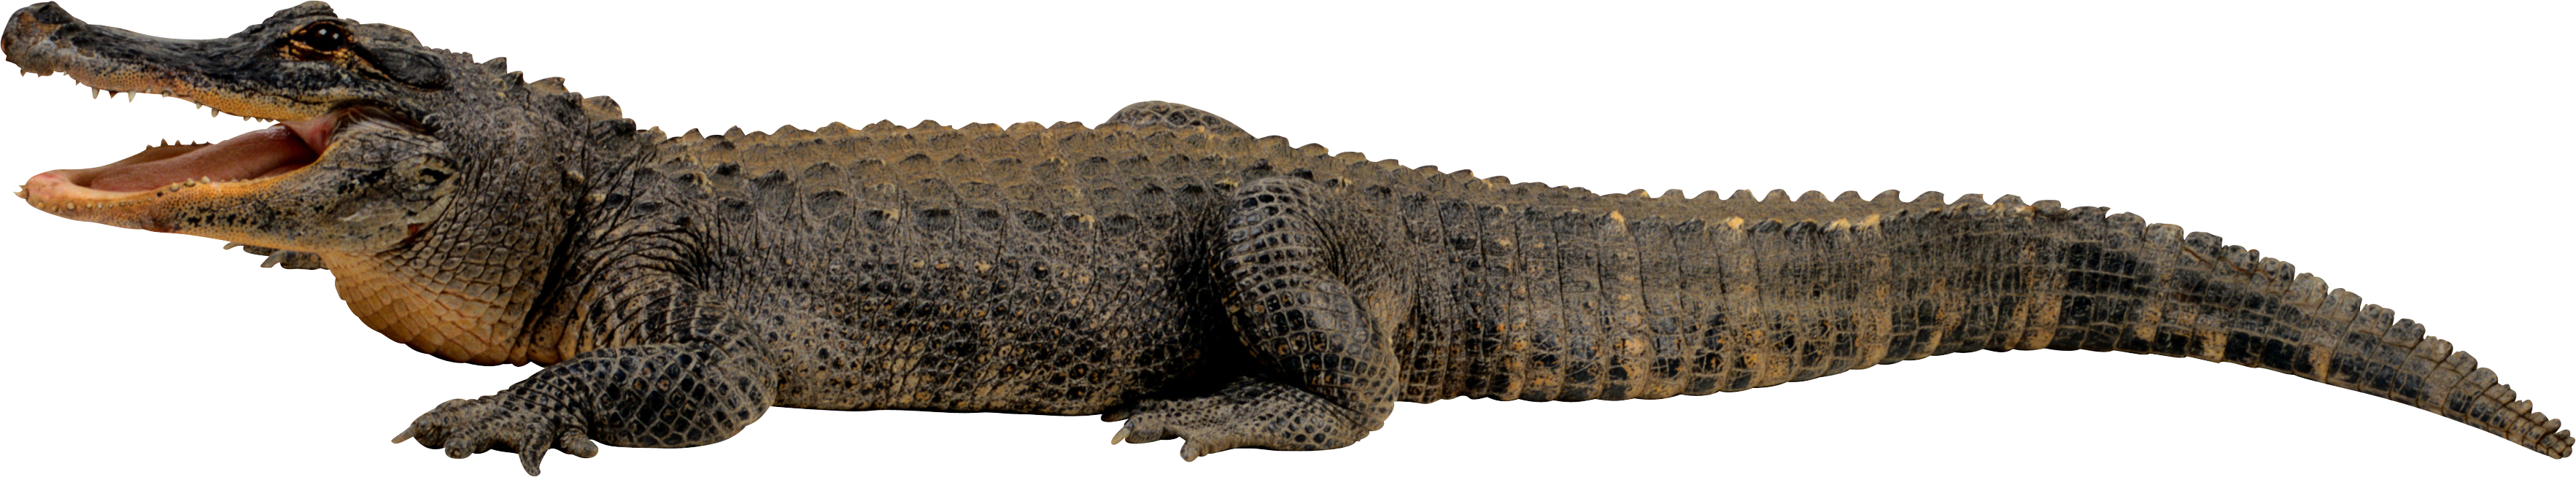 Png images free download. Gator clipart crocodile australian